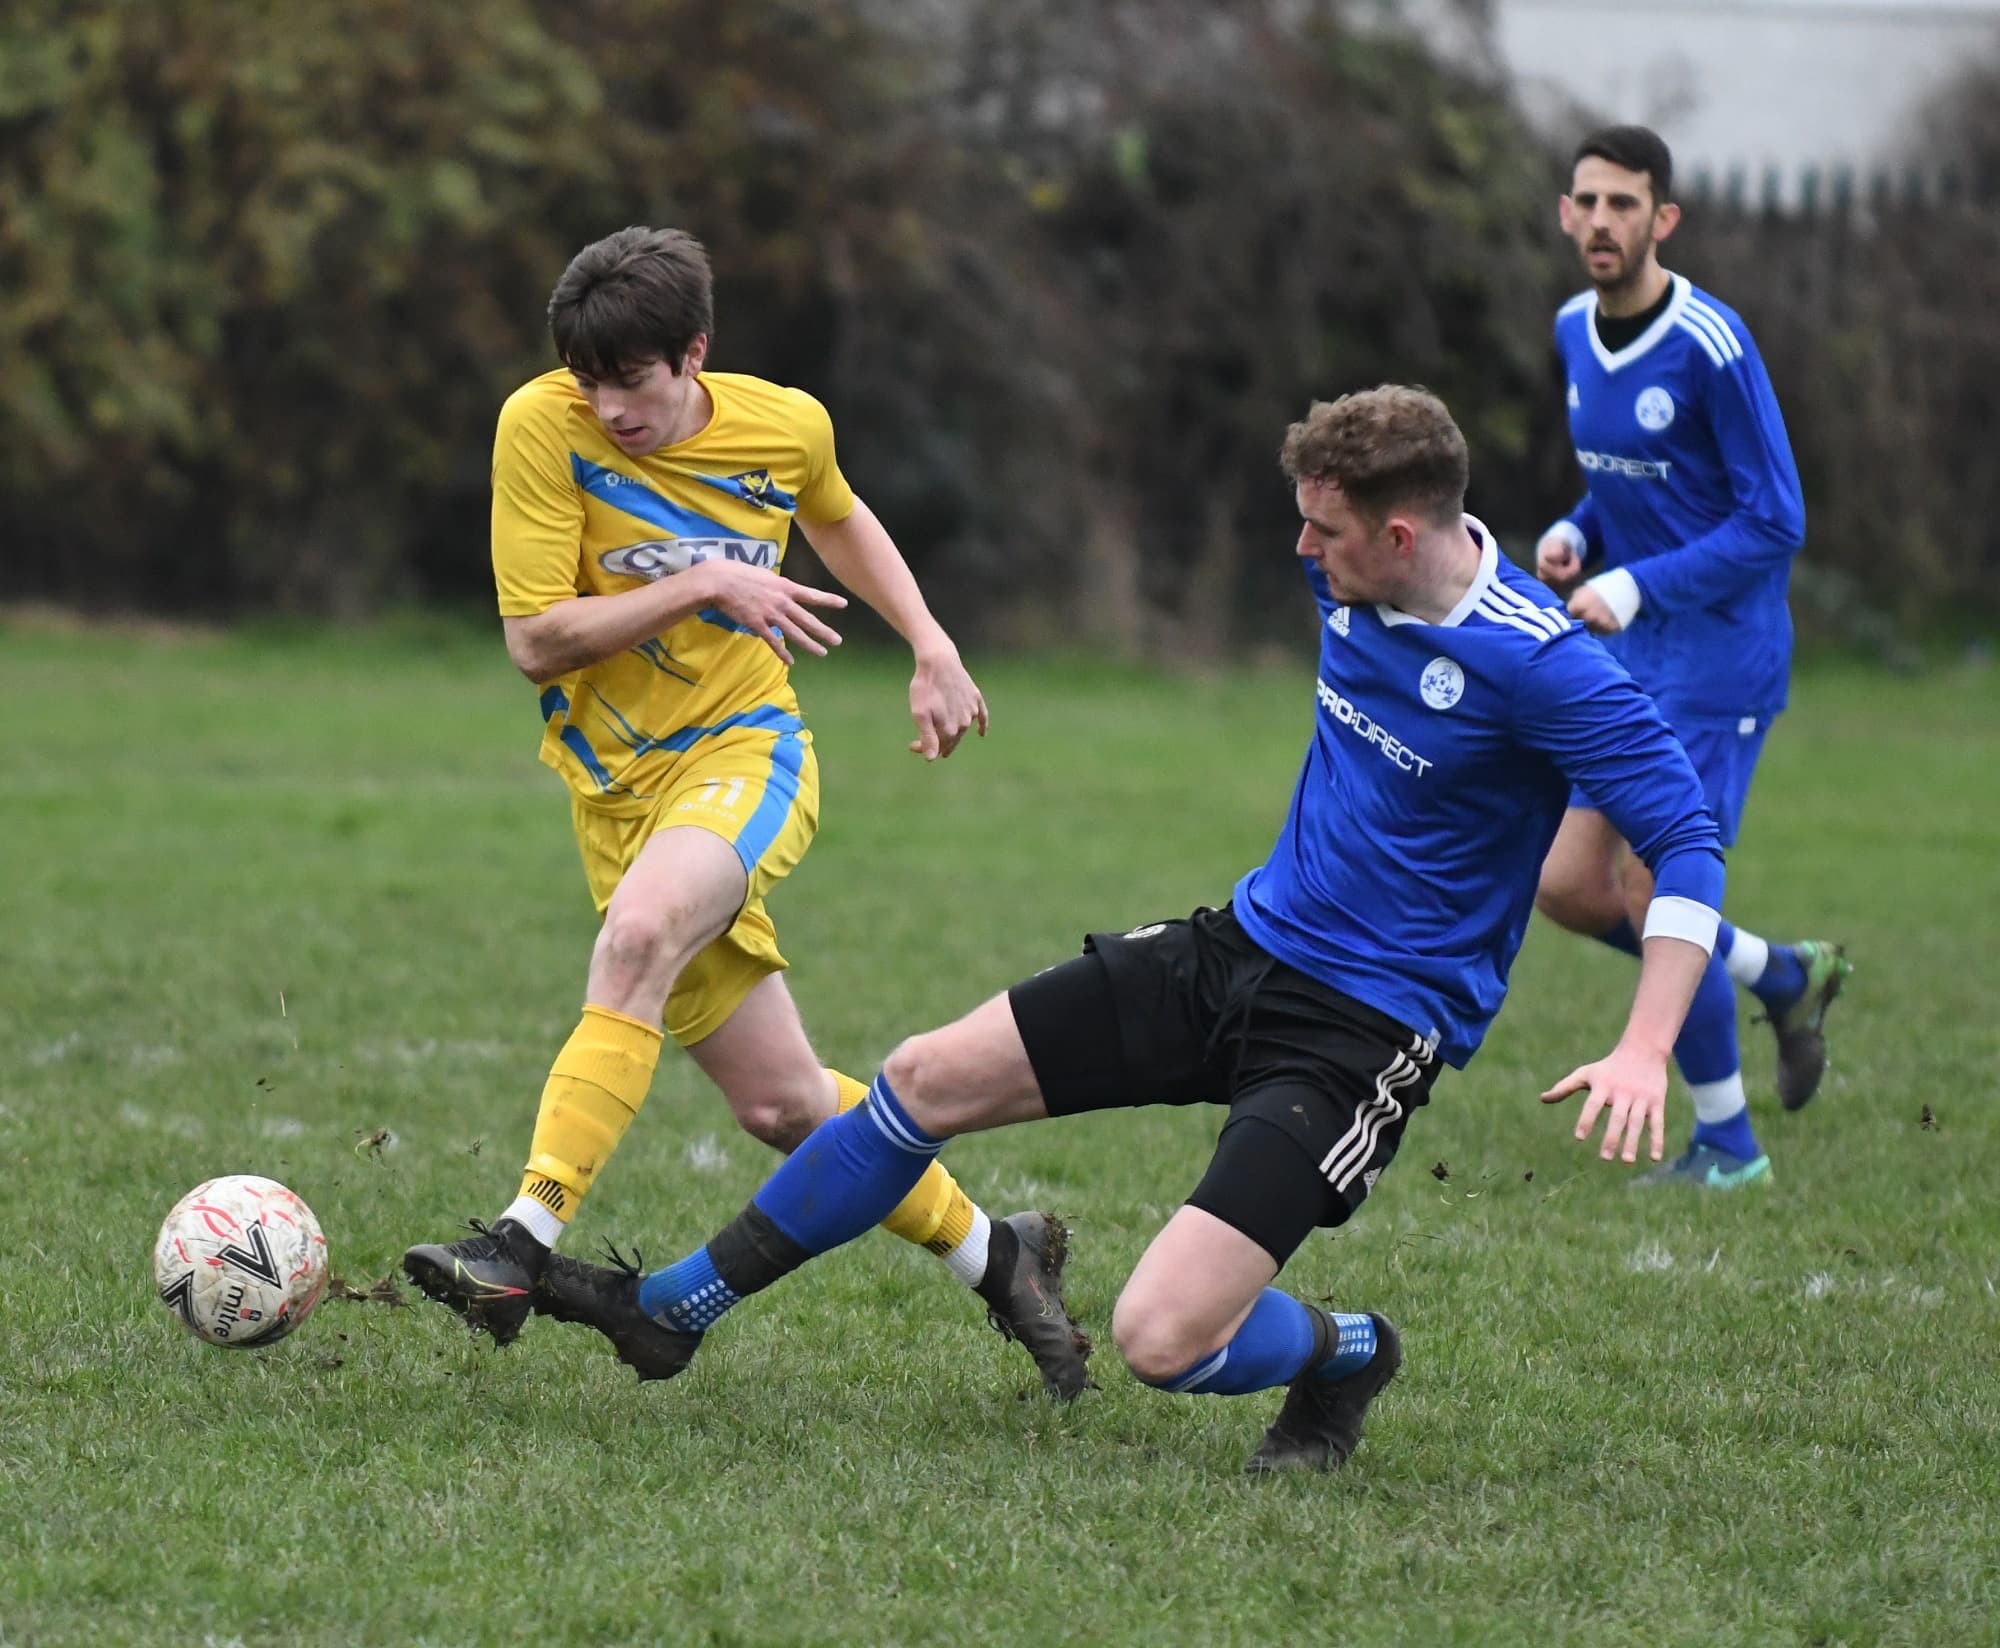 WEEK 19 REVIEW: Round-up of all the league and cup action from the weekend